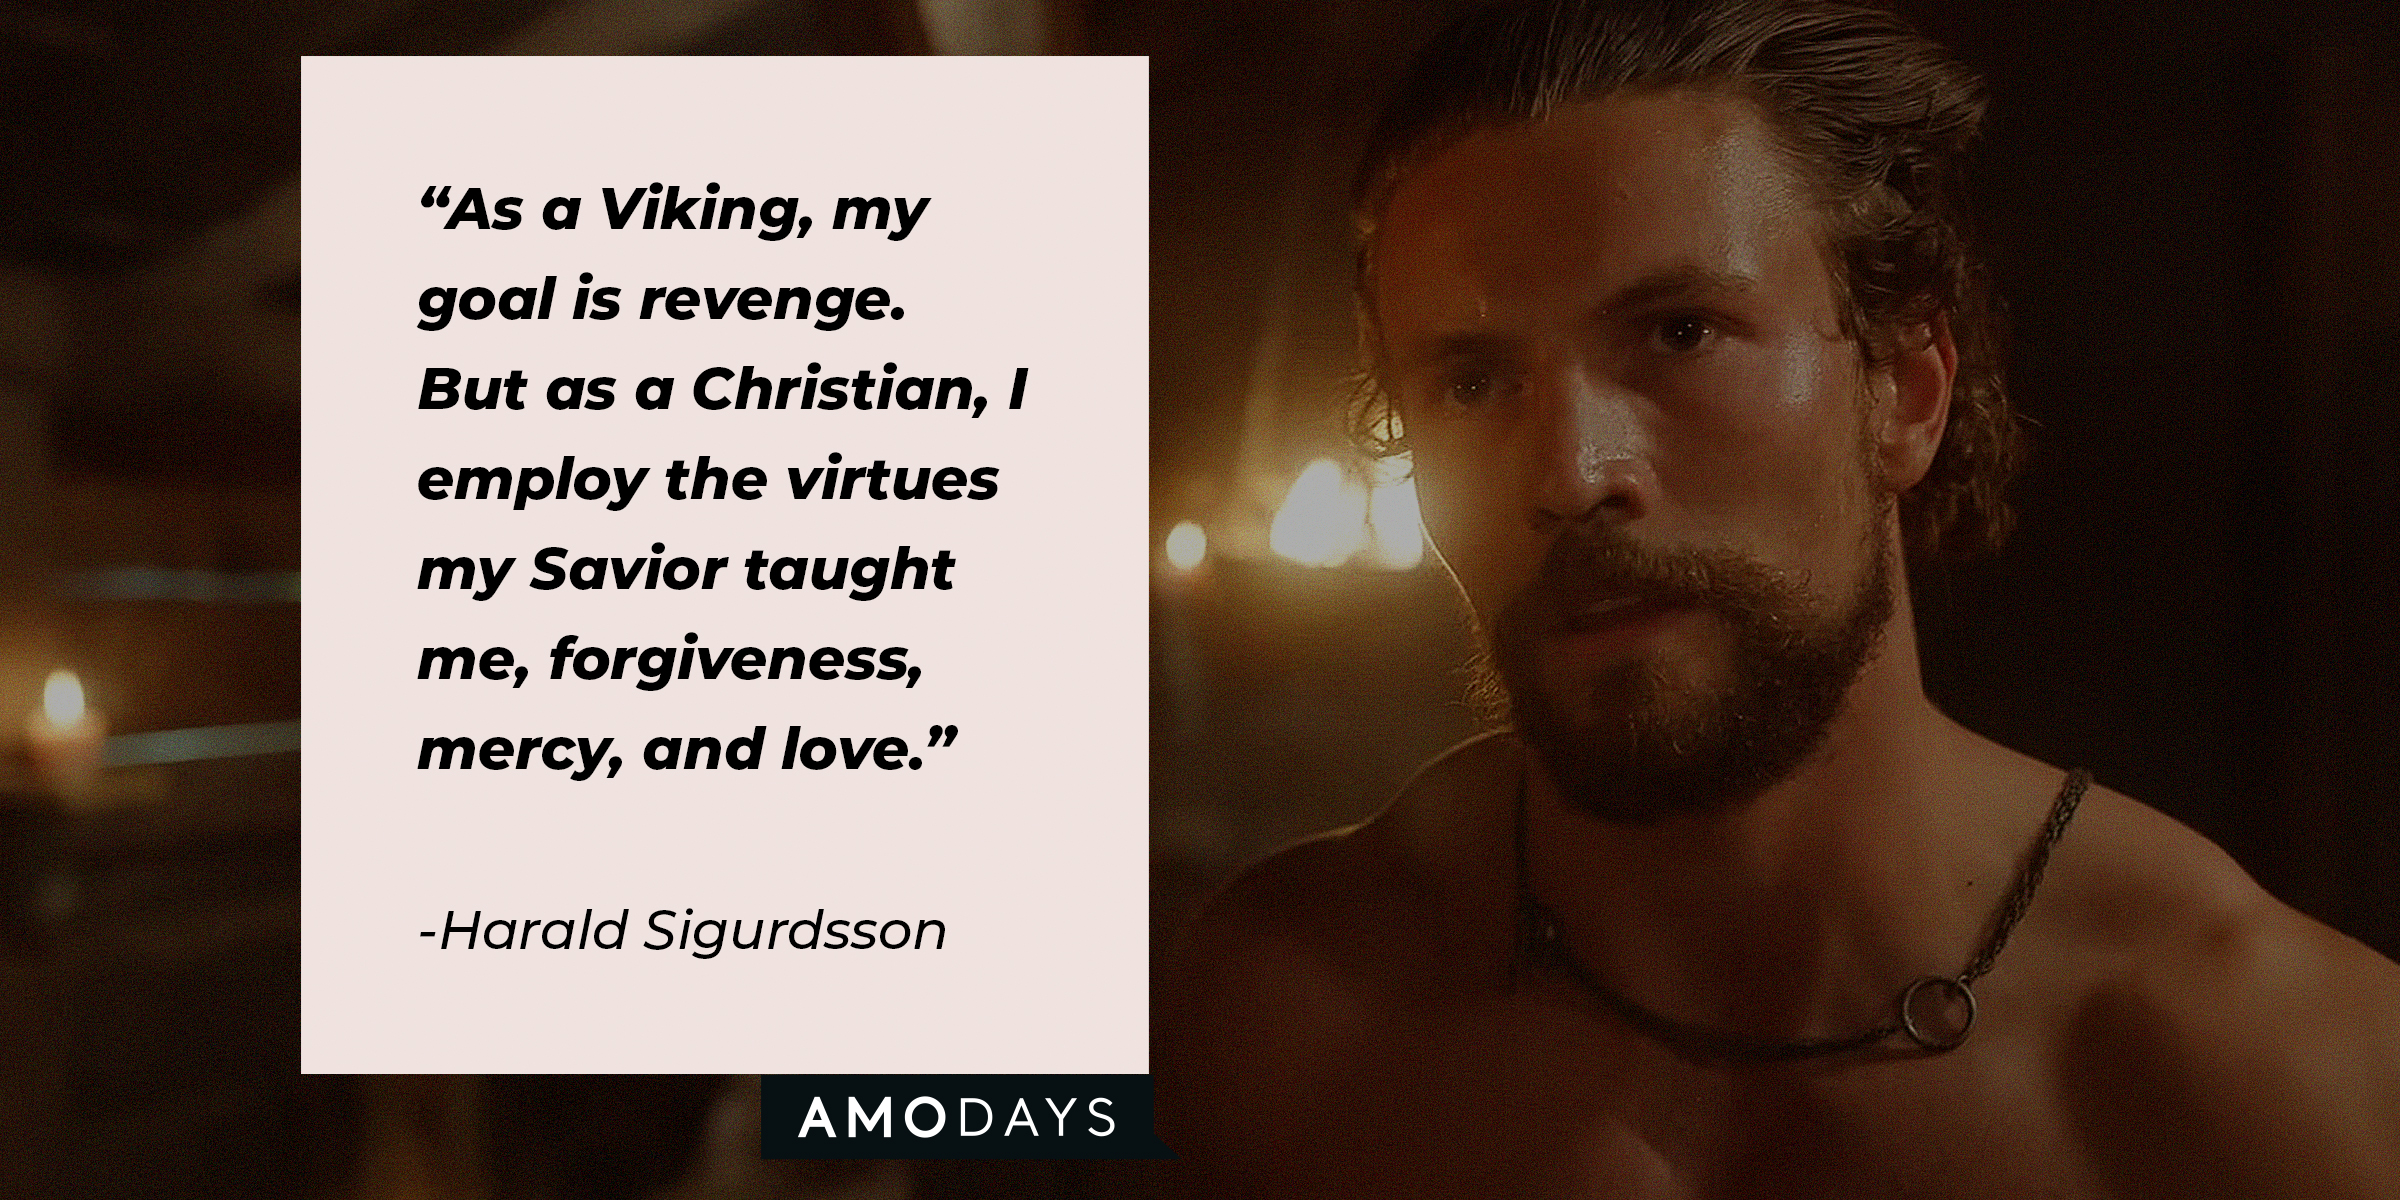 Source: Youtube.com/Netflix | Harald Sigurdsson's character with the quote: "As a Viking, my goal is revenge. But as a Christian, I employ the virtues my Savior taught me, forgiveness, mercy, and love."